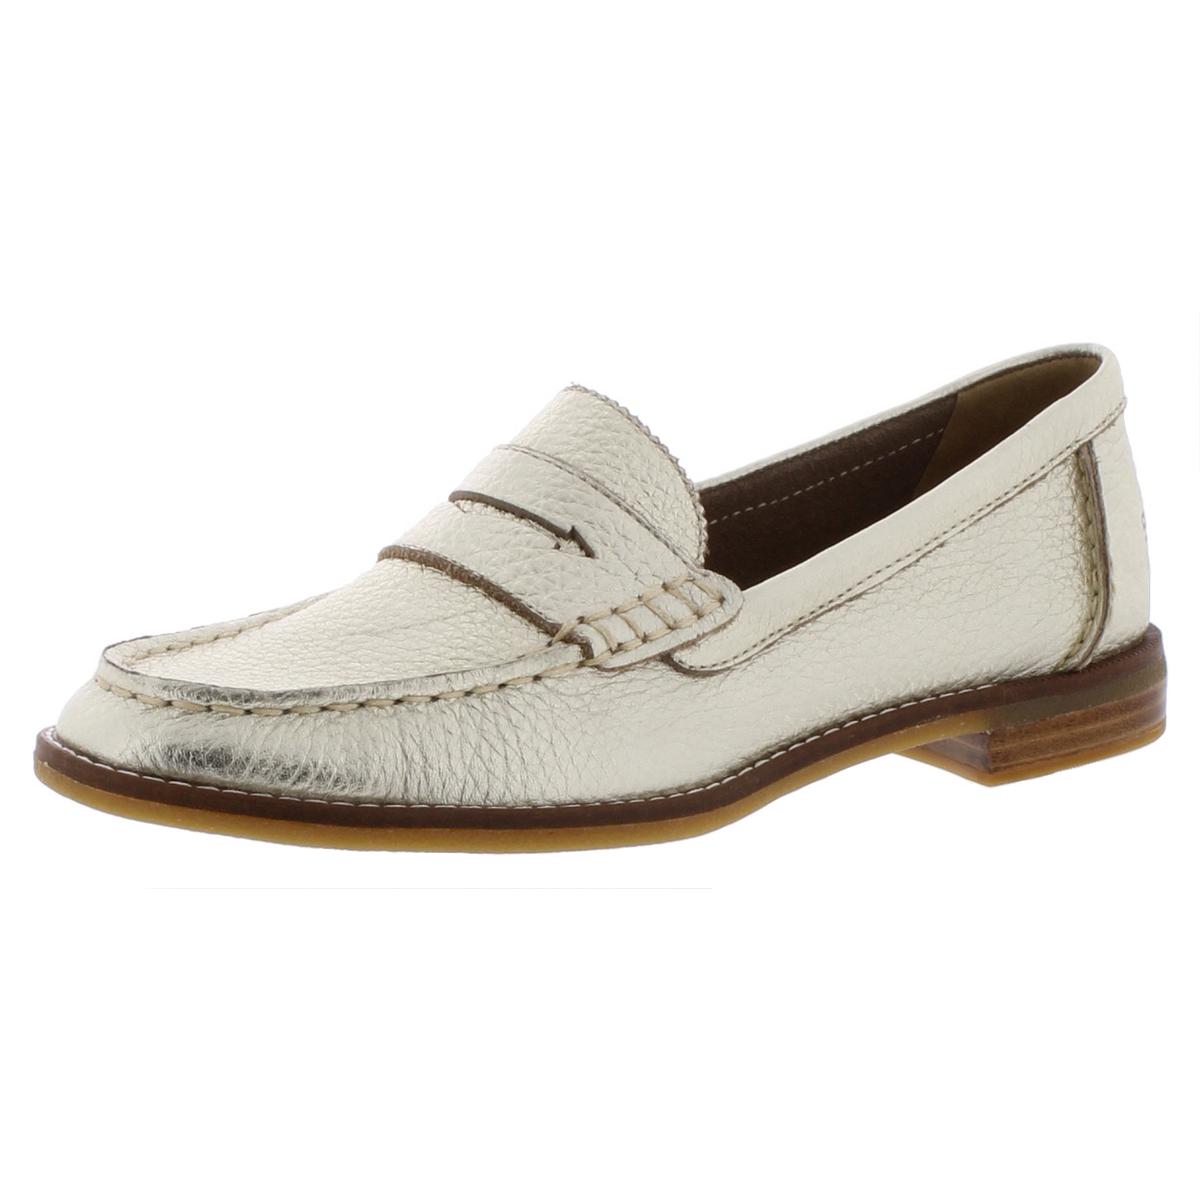 Sperry Womens Seaport Gold Penny Loafers Shoes 9.5 Medium (B,M) BHFO ...